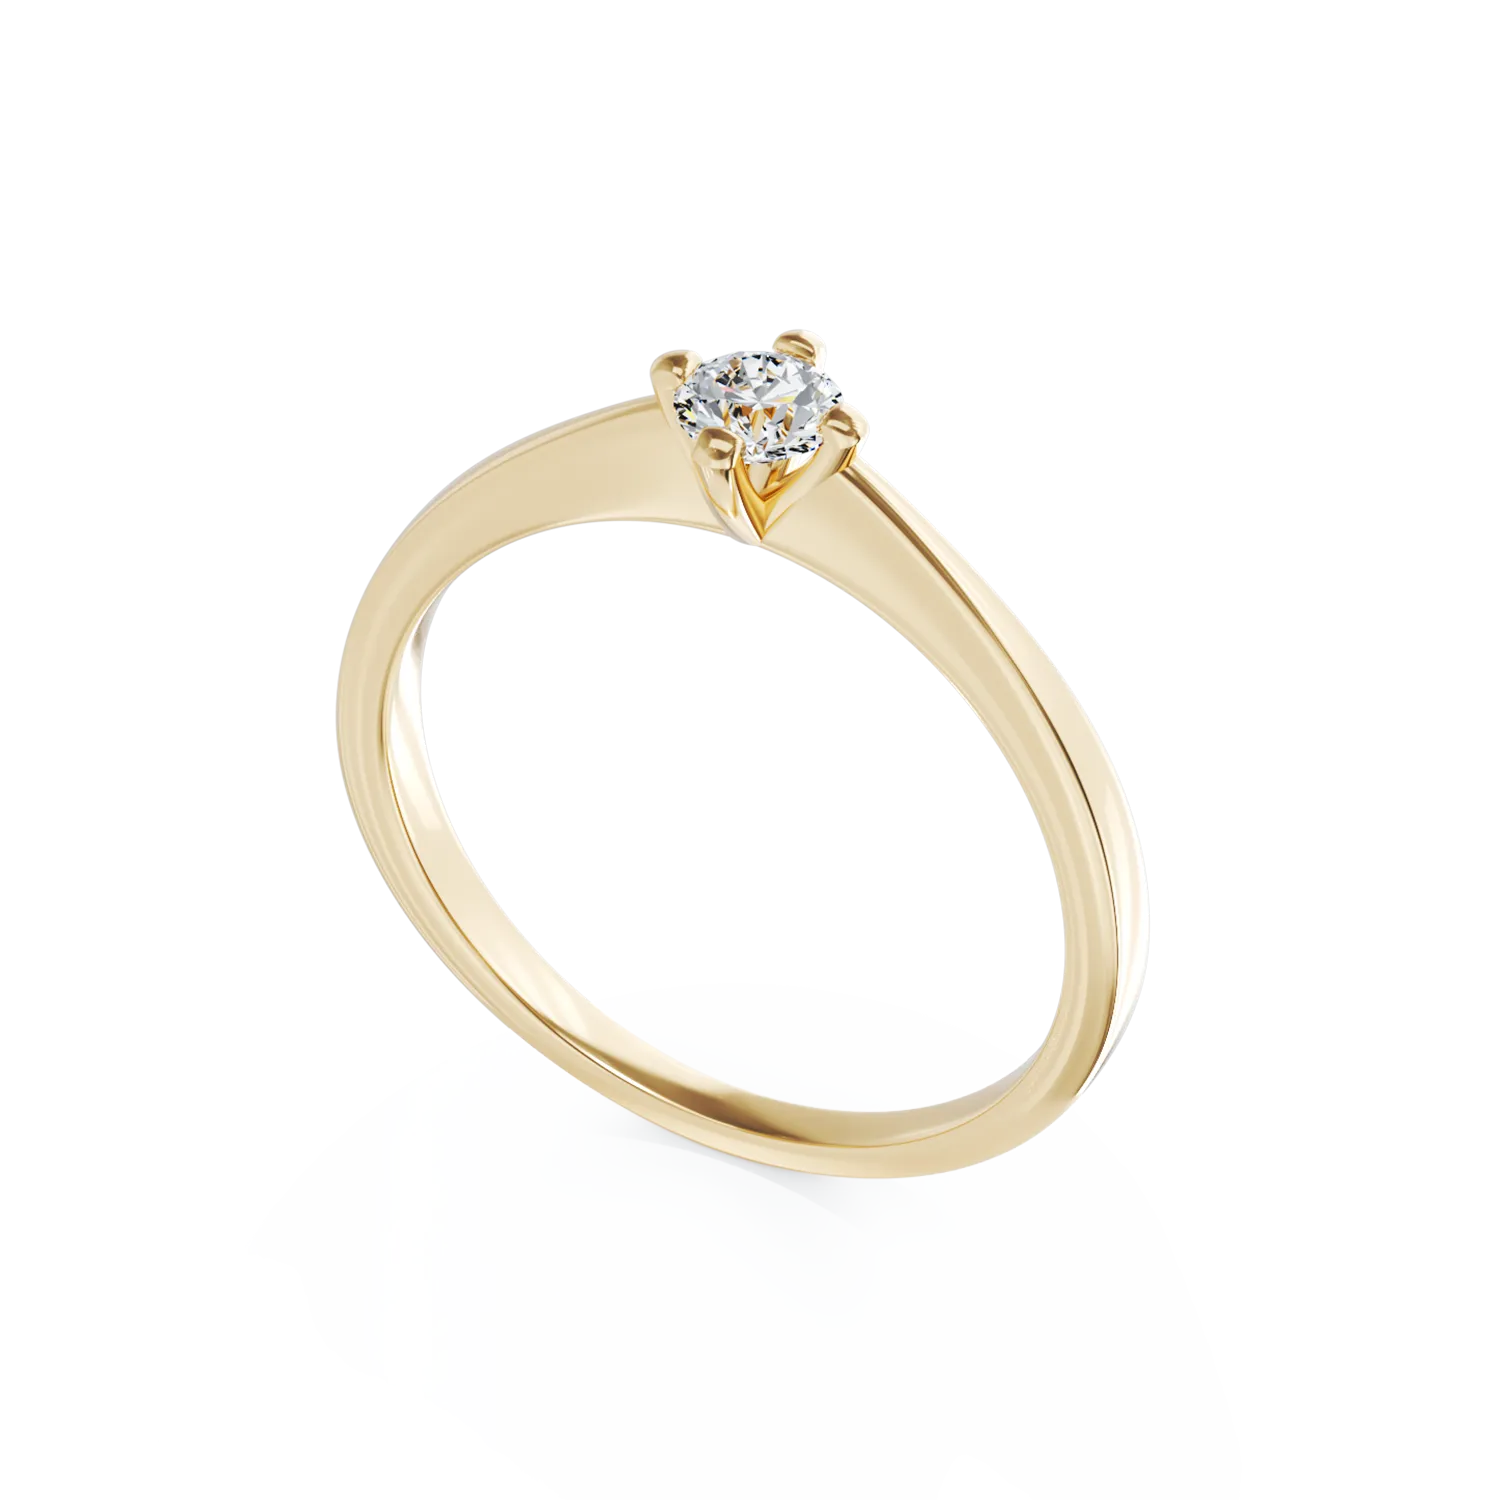 18K yellow gold engagement ring with 0.19ct solitaire diamond